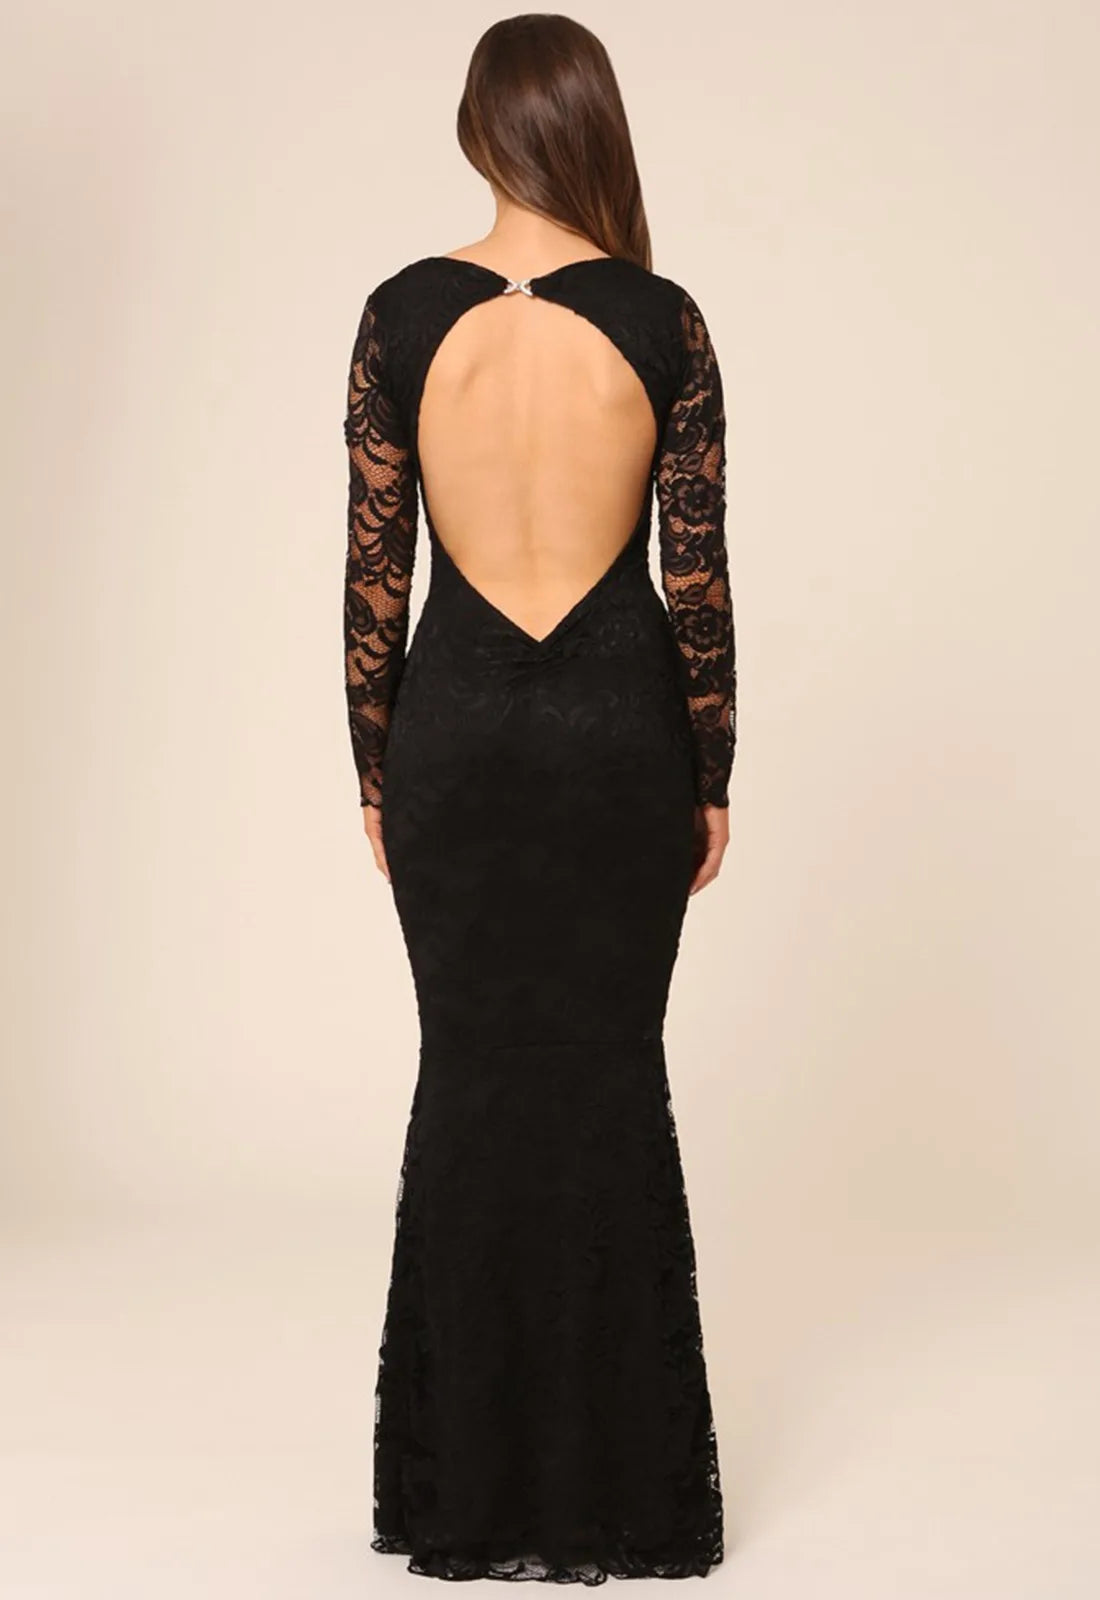 Honor Gold Faye Long Sleeve Backless Lace Maxi Dress in Black-14303